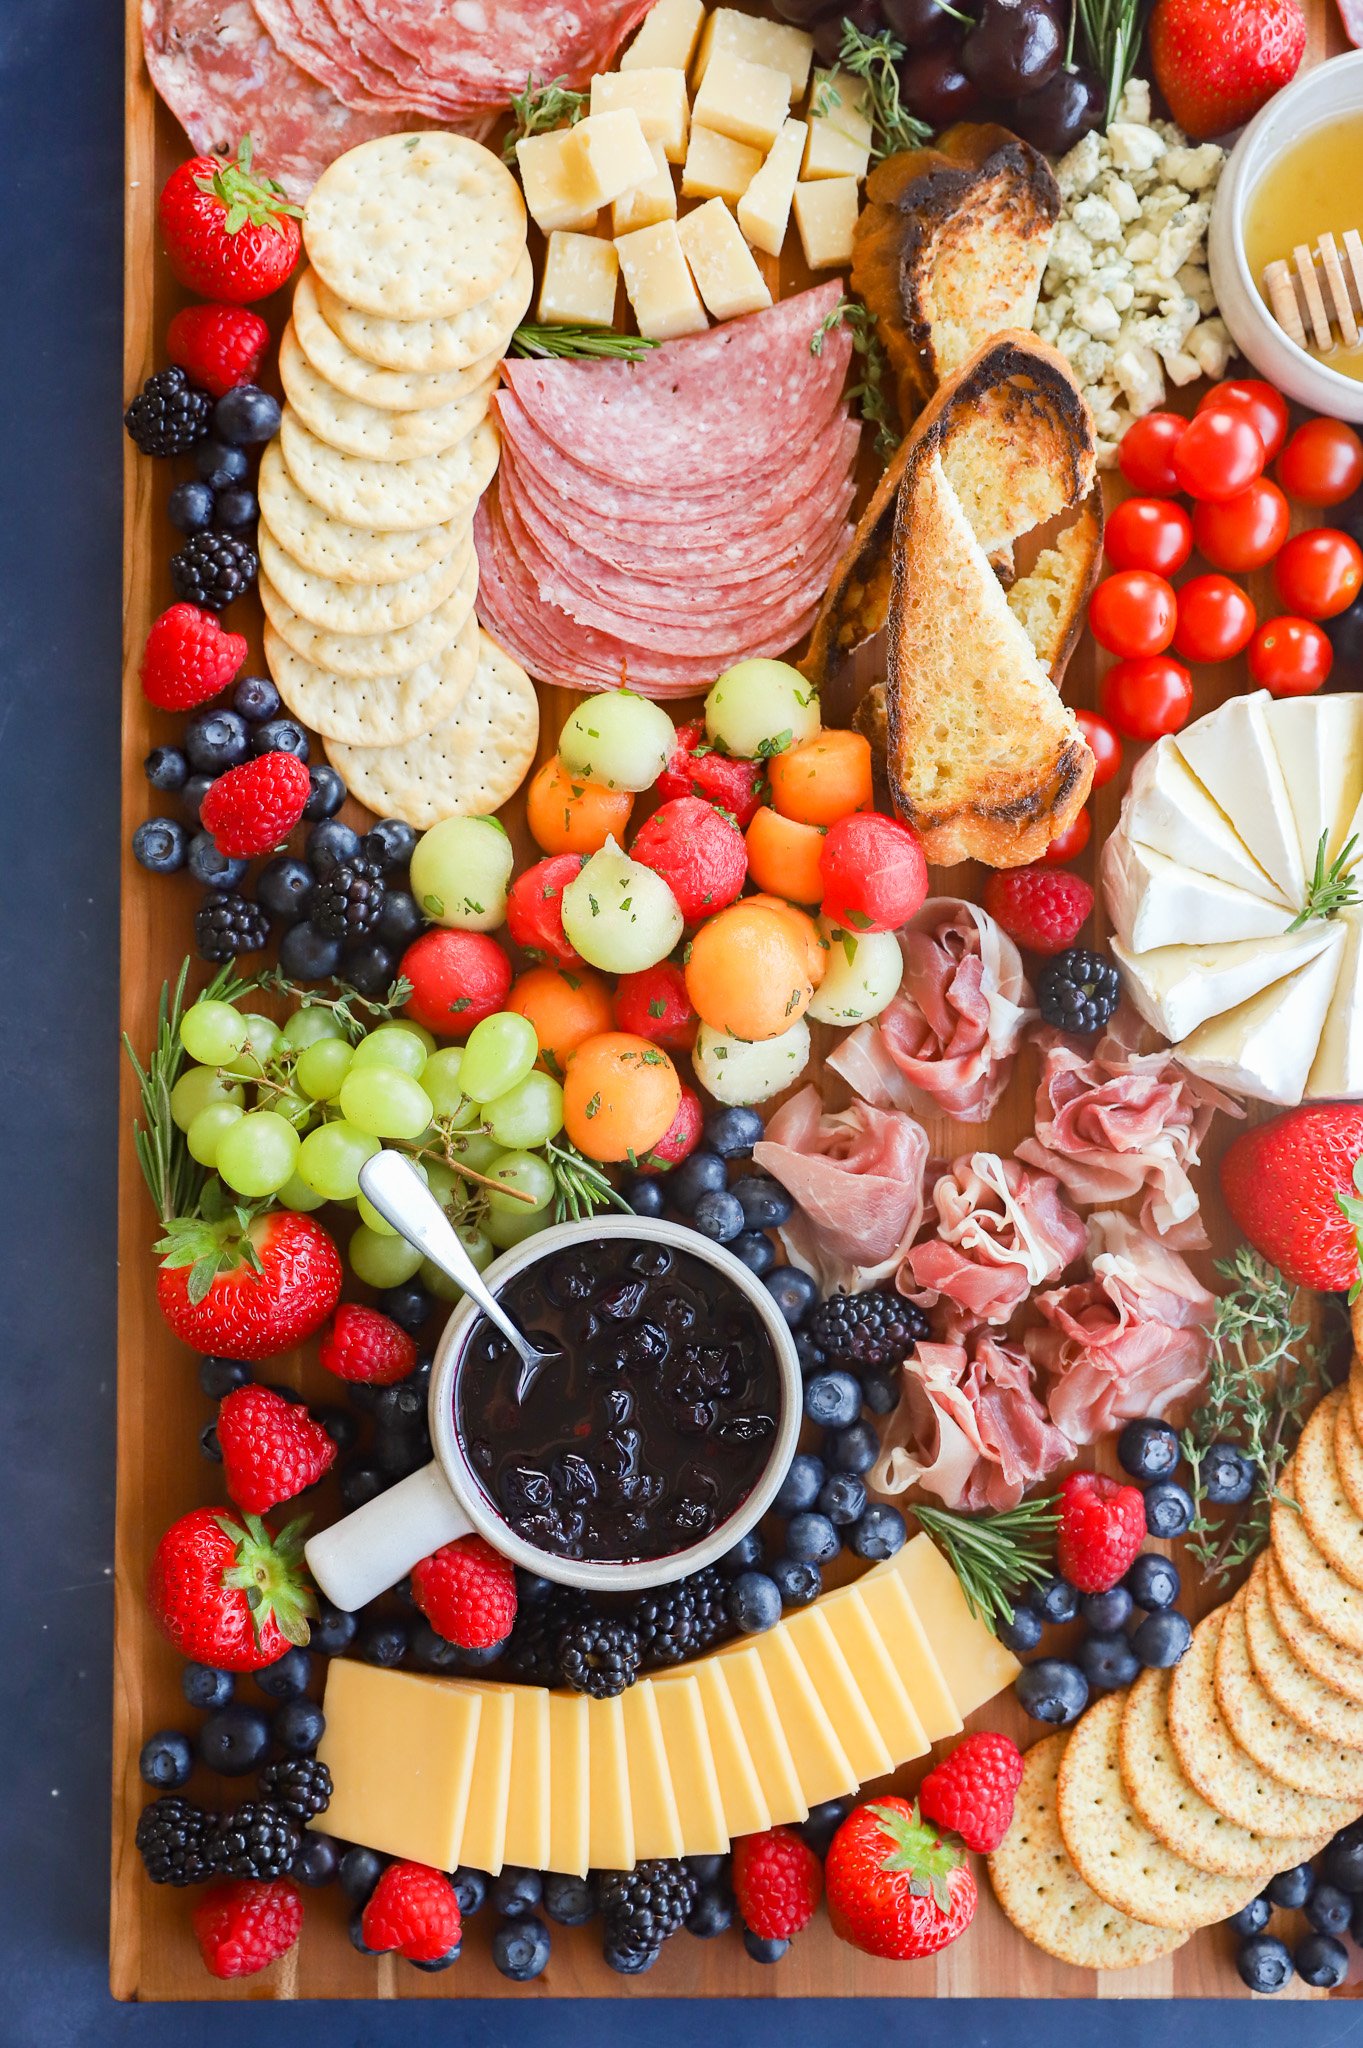 Overhead image of platter of cheeses meats and fruits for summer